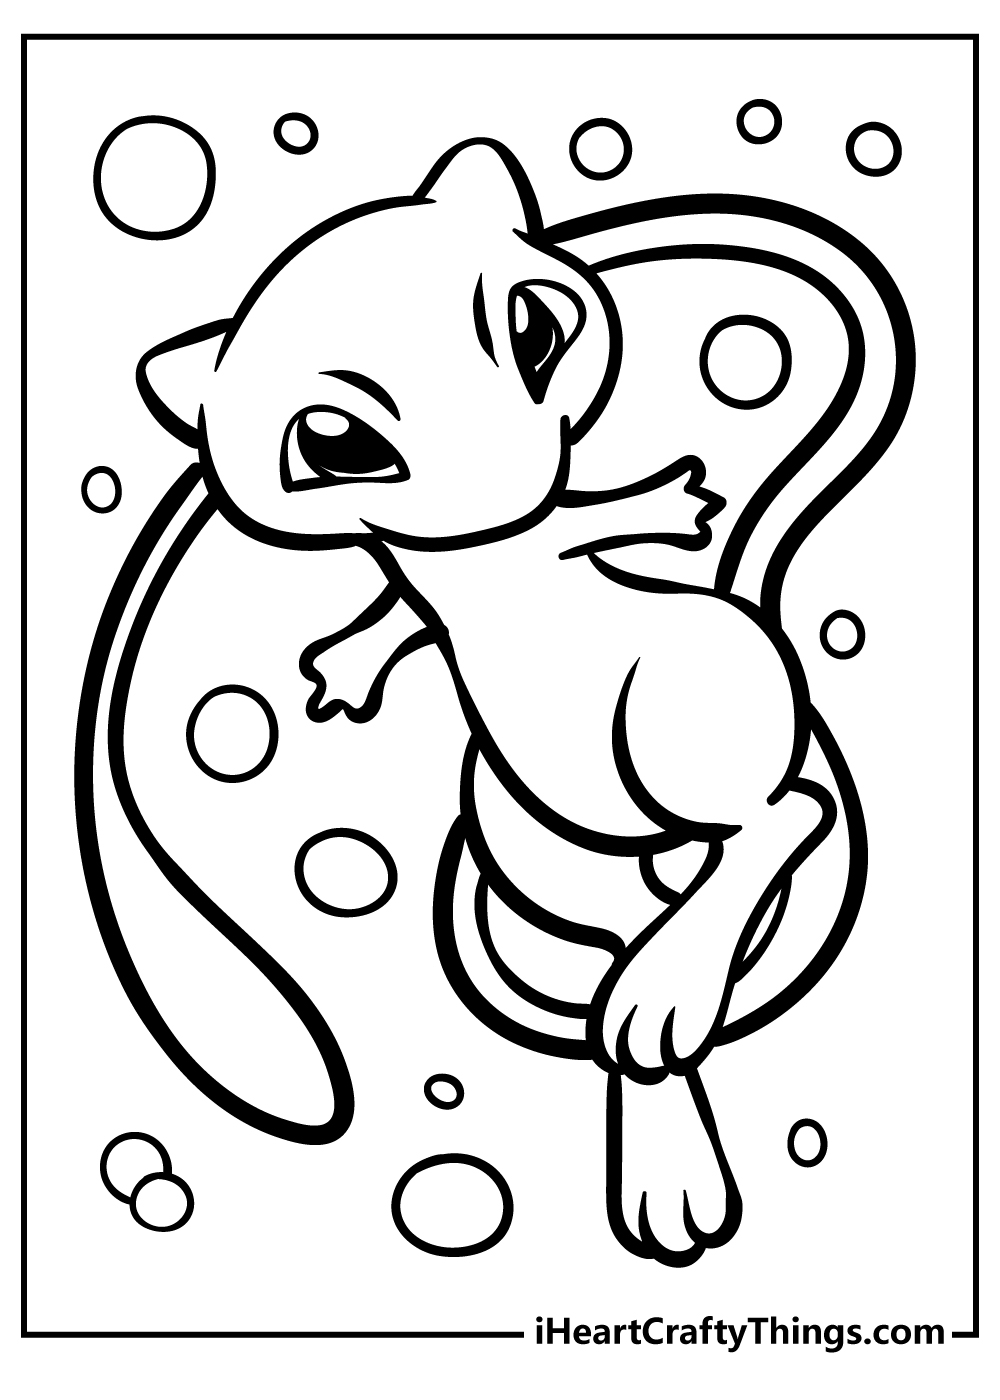 Pokemon Coloring Sheet for children free download